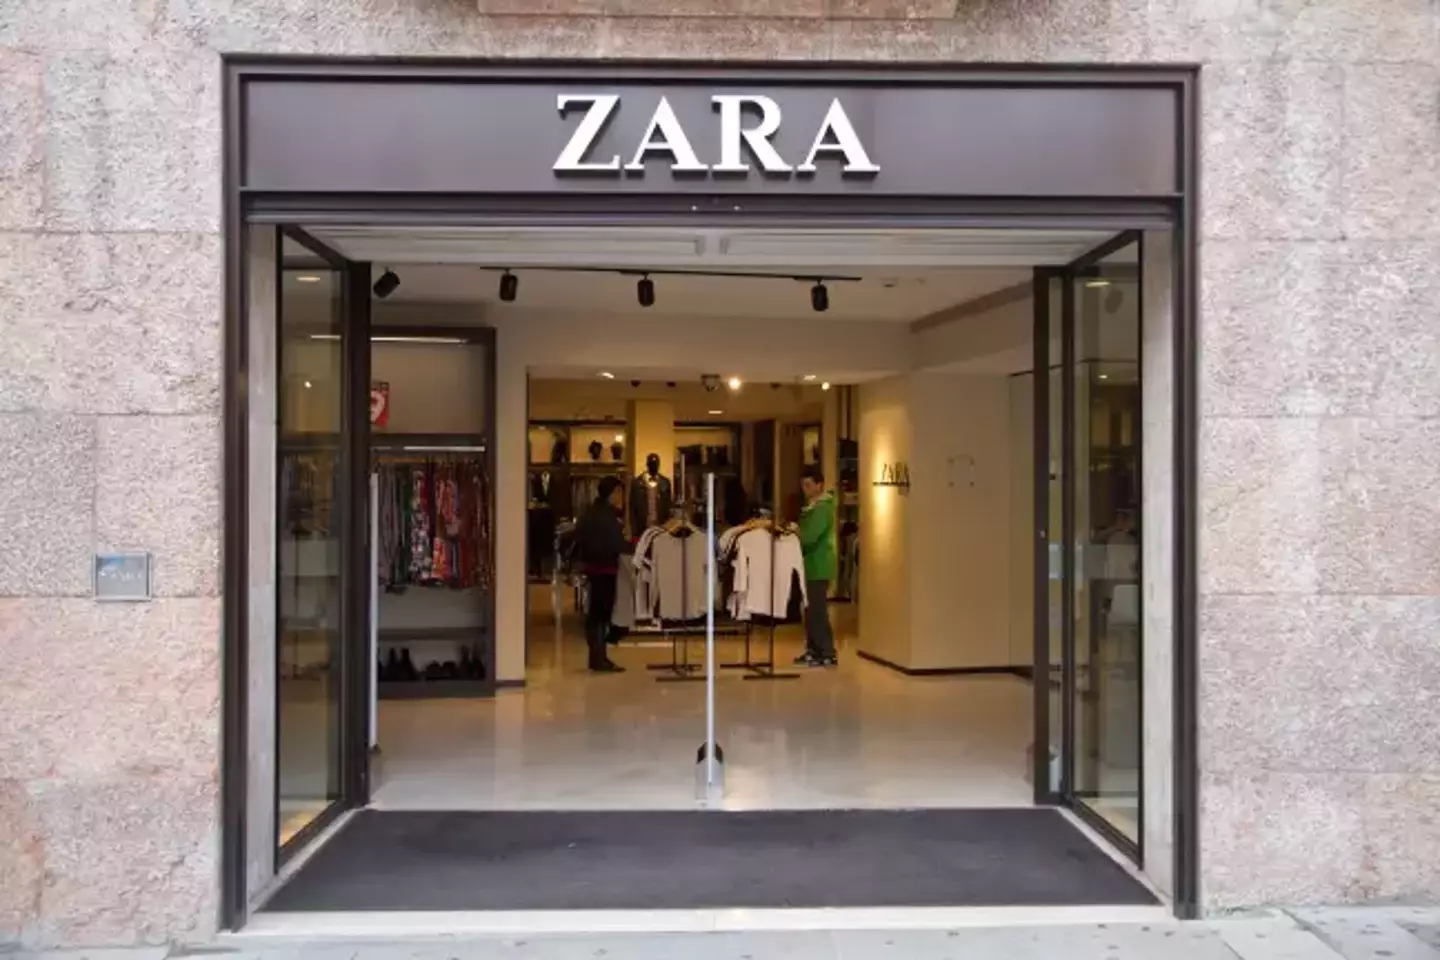 Did you know it's often cheaper to shop at Zara abroad than over here in the UK?